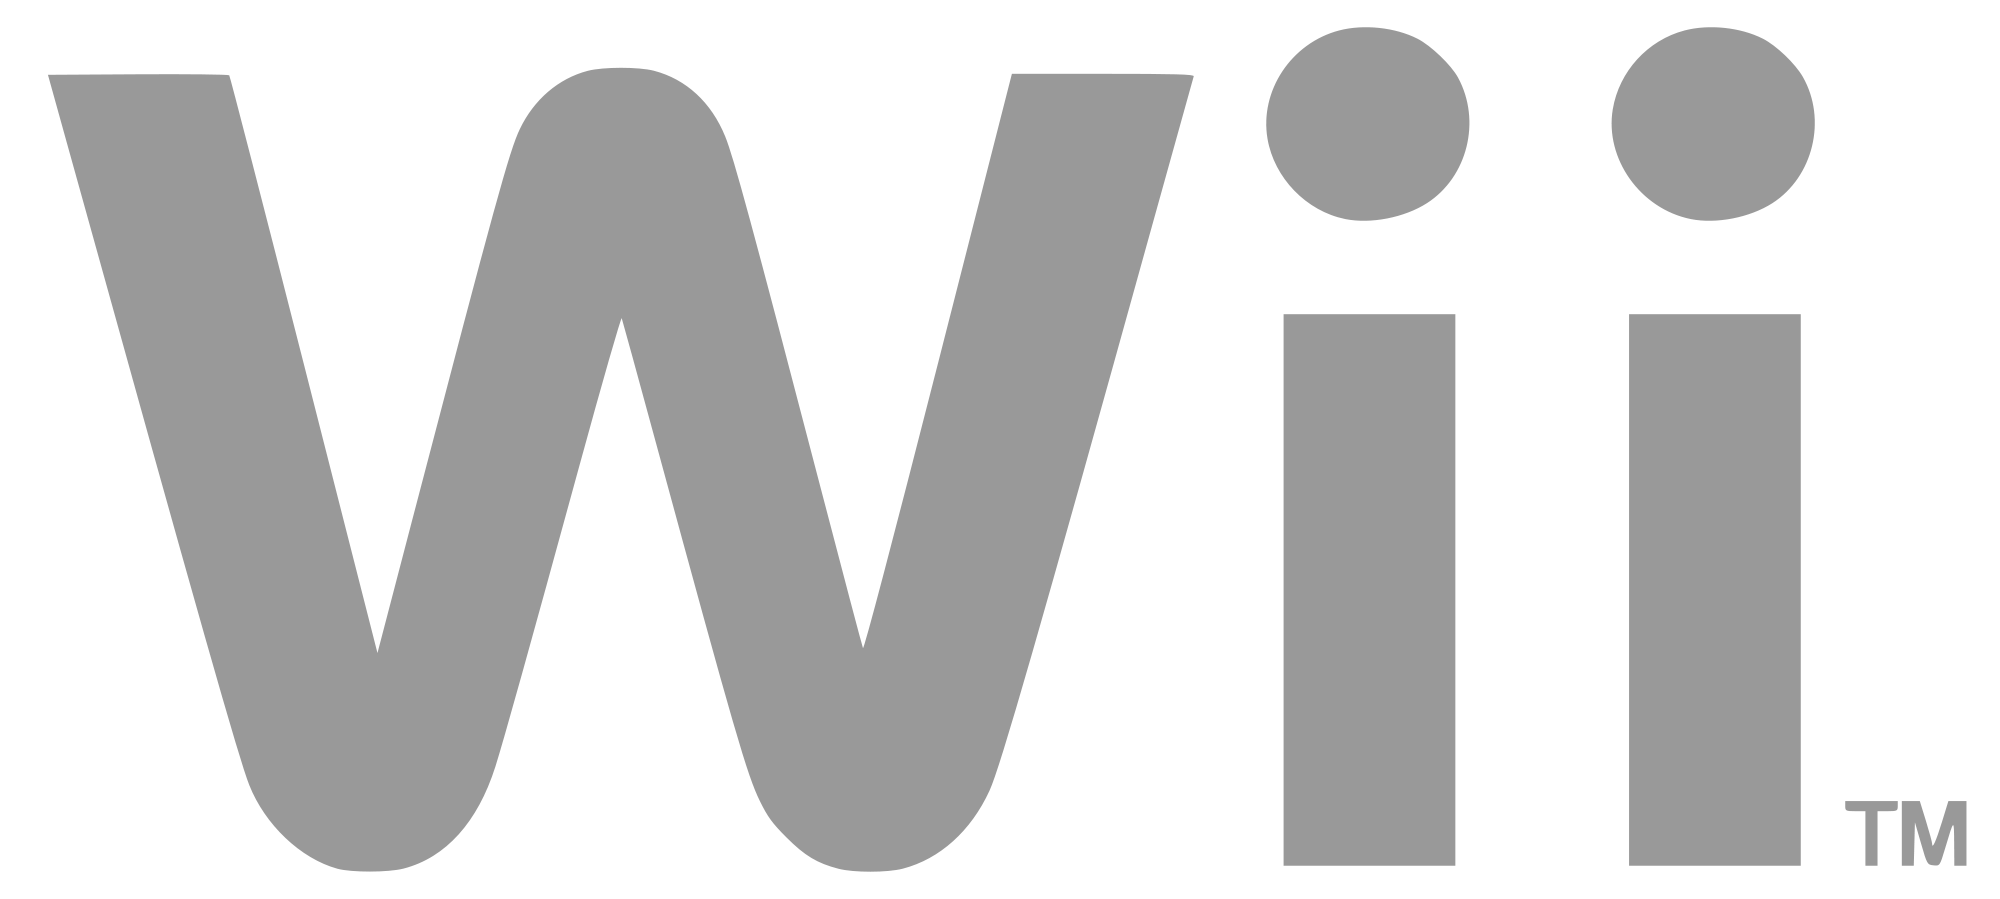 Wii Logo - File:Wii logo.png - Wikimedia Commons